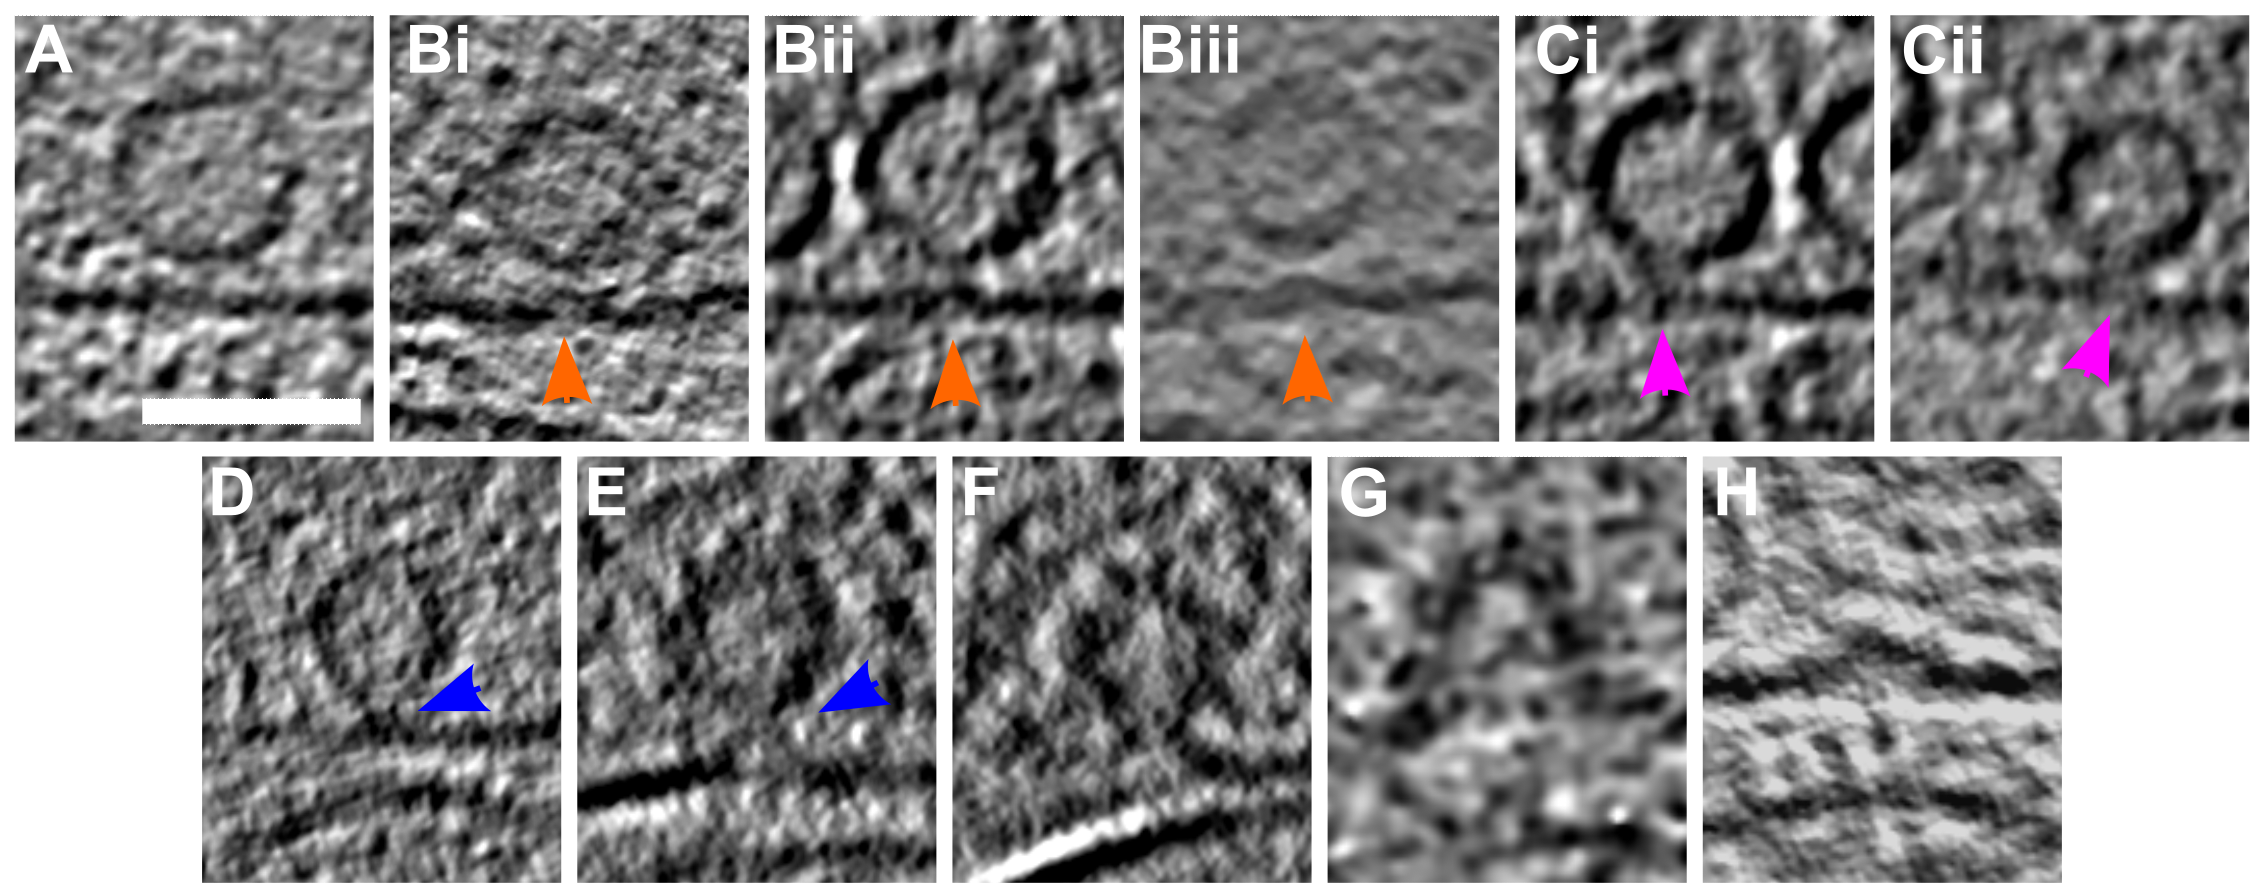 Figure 3: SV exocytosis morphology. (A-H) Tomographic slice of non-stimulated (A) and stimulated rat synaptosomes (B-H). A) Image of a 2.2-nm thick tomographic slice showing a non-stimulated with SVs at the AZ and a straight PM. Bi) Membrane curvature event, 2.2-nm thick tomographic slice. Bii) Membrane curvature event, 6.5-nm thick tomographic slice. Biii) Membrane curvature event, 2.24 nm thick tomographic slice. Orange arrows showing membrane curvature event. Ci,Cii) Lipid perturbations of PM and SV, 22-nm thick tomographic slices. The space between SV and PM is denser than in the non-stimulated synaptosomes (see pink arrow). D-F) Vesicles with a pore opening that might be on the way to full collapse fusion, 33-nm thick tomographic slice thickness: 22 nm (D), 30.8 (E), 33 nm (F). G) Wide pore opening, most likely on the way to full collapse fusion, 2.2-nm tomographic slice. H) Remaining bump at the end of full collapse fusion, 11-nm thick tomographic slice. Scale bar, 50 nm. Total number of observations of each type of exocytosis events: B, 8; C, 3; D, 3; E, 2; F, 3; G, 1; H, 11. Events of type B to E were classified as early, while events of type F to H were classified as late.